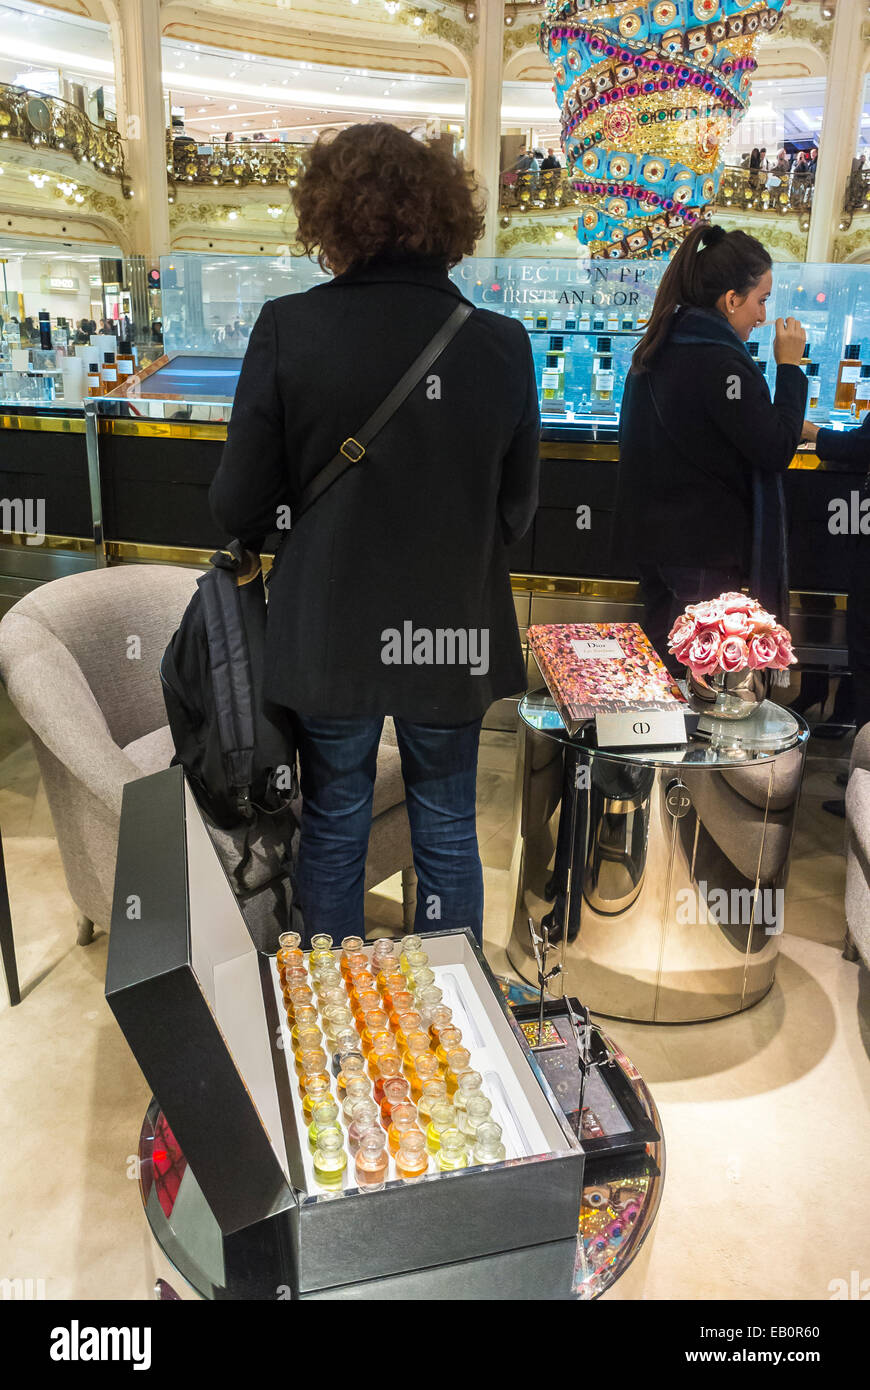 Paris, France, Women Shopping inside French Department Store, Galeries  Lafayettes, Local Clothing Brands Comptoir des Cotonniers paris shopping  girls Stock Photo - Alamy